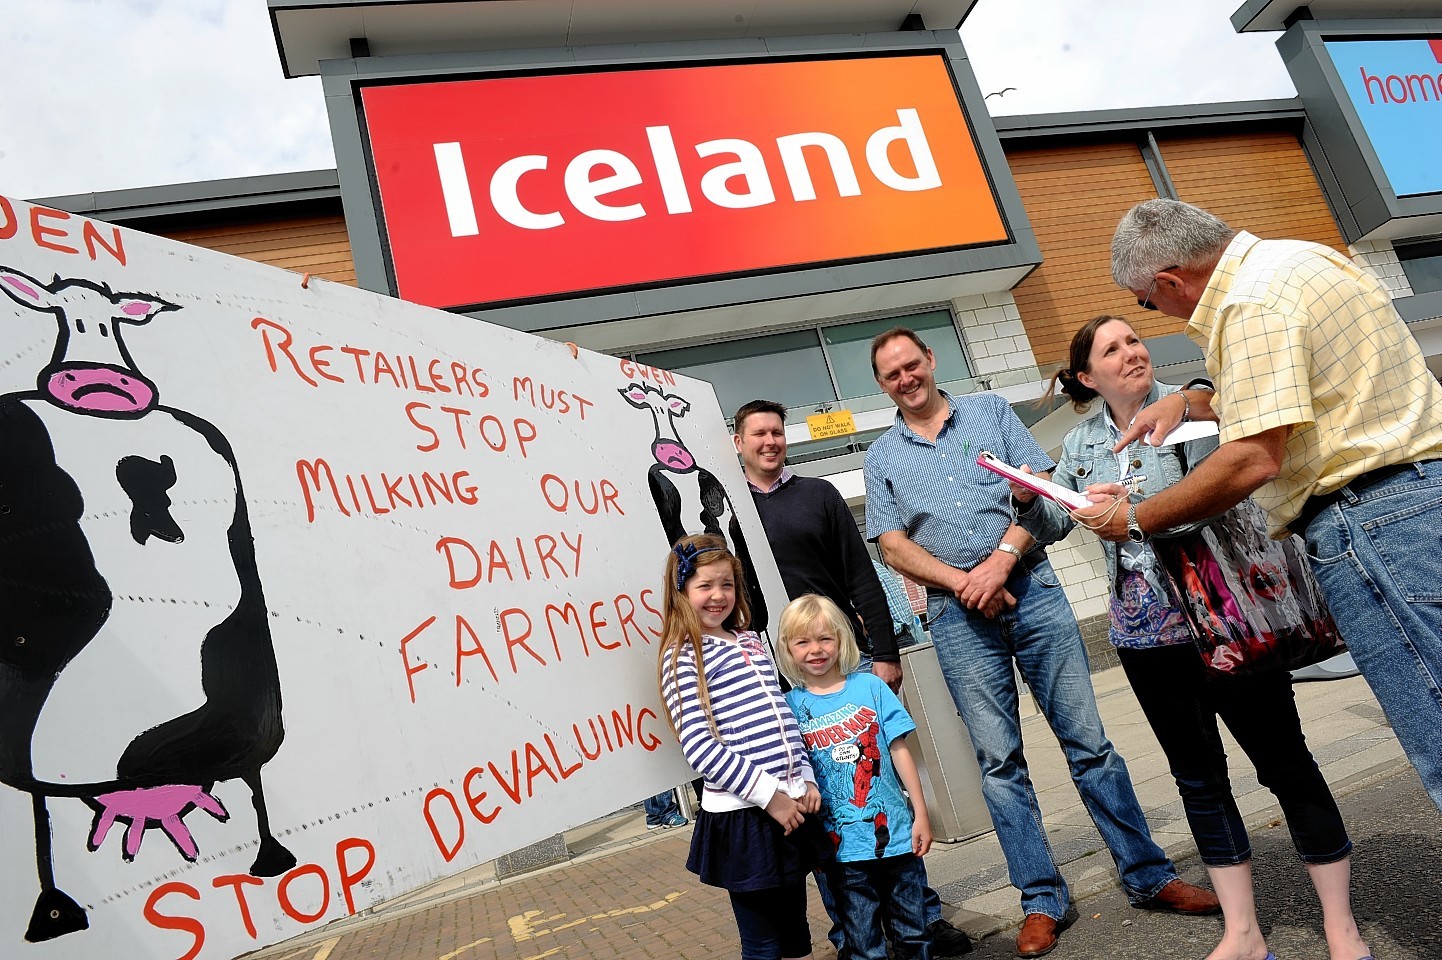 Dairy farmers protesting outside Iceland in Inverurie in 2012